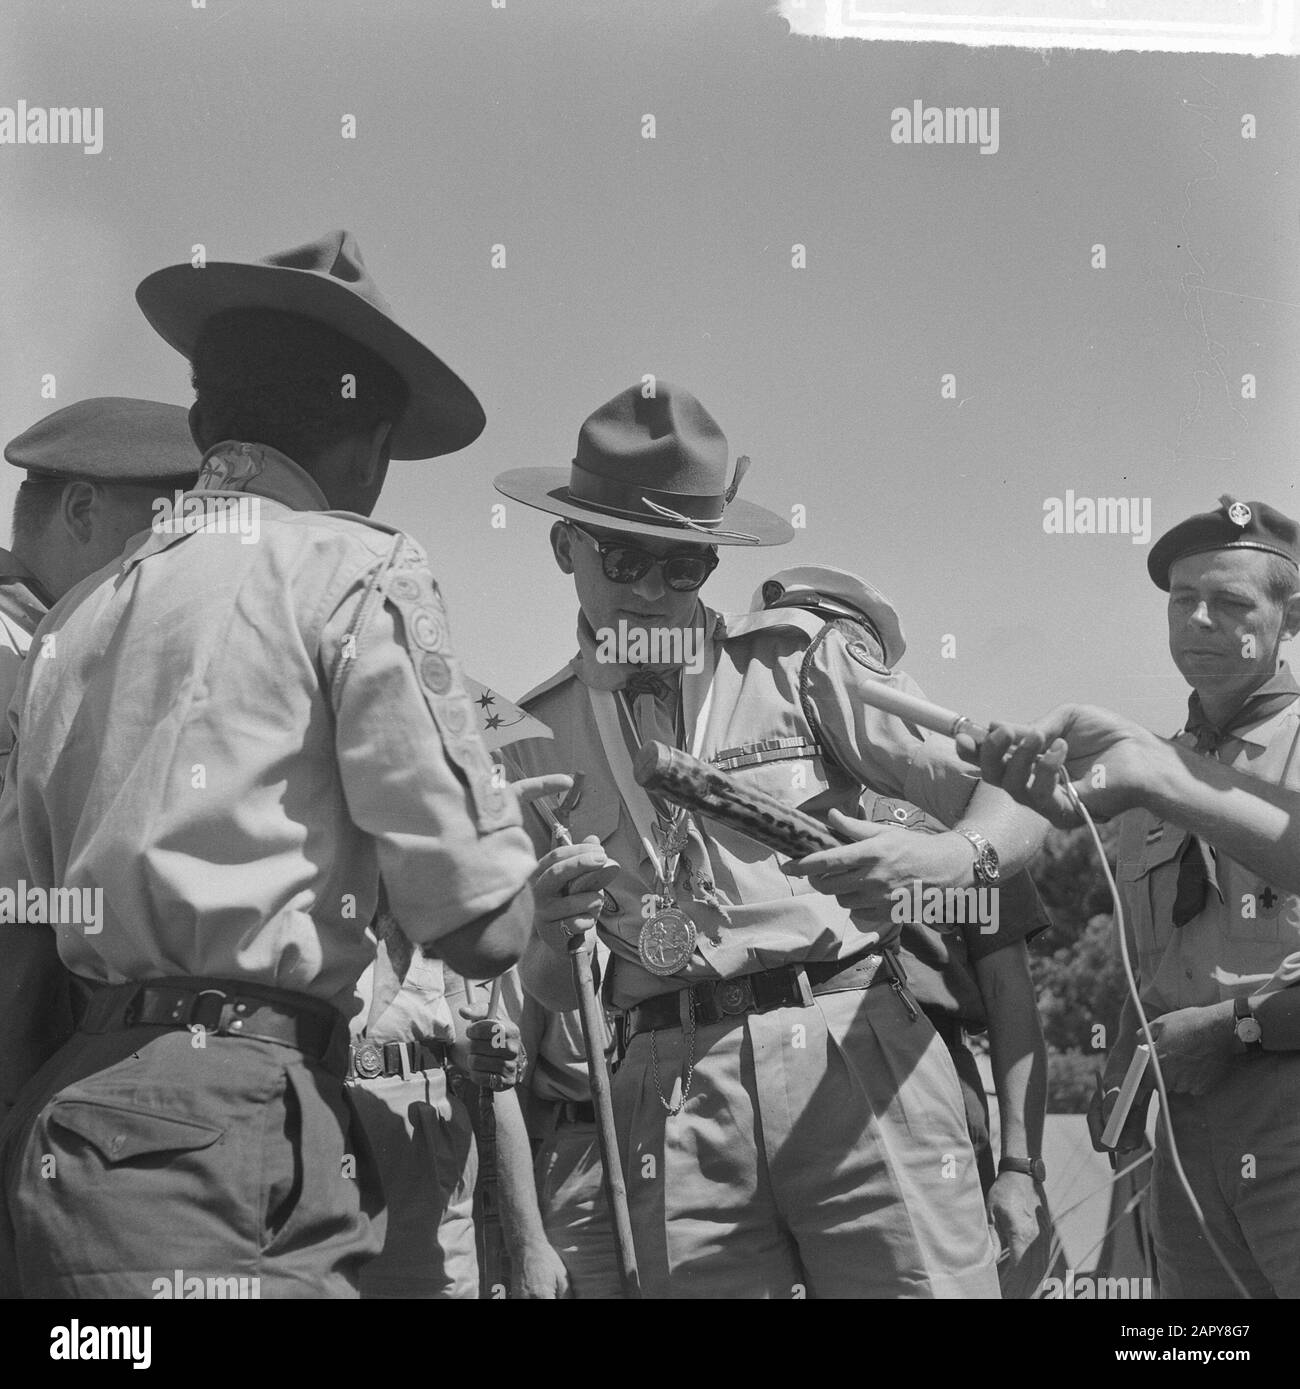 Jamboree 1963 at Marathon Greece. The only Surinamer in the camp gave the prince an article of his country Date: 12 August 1963 Location: Greece Keywords: COUNTRIES, camps, princes Institution name: Jamboree Stock Photo